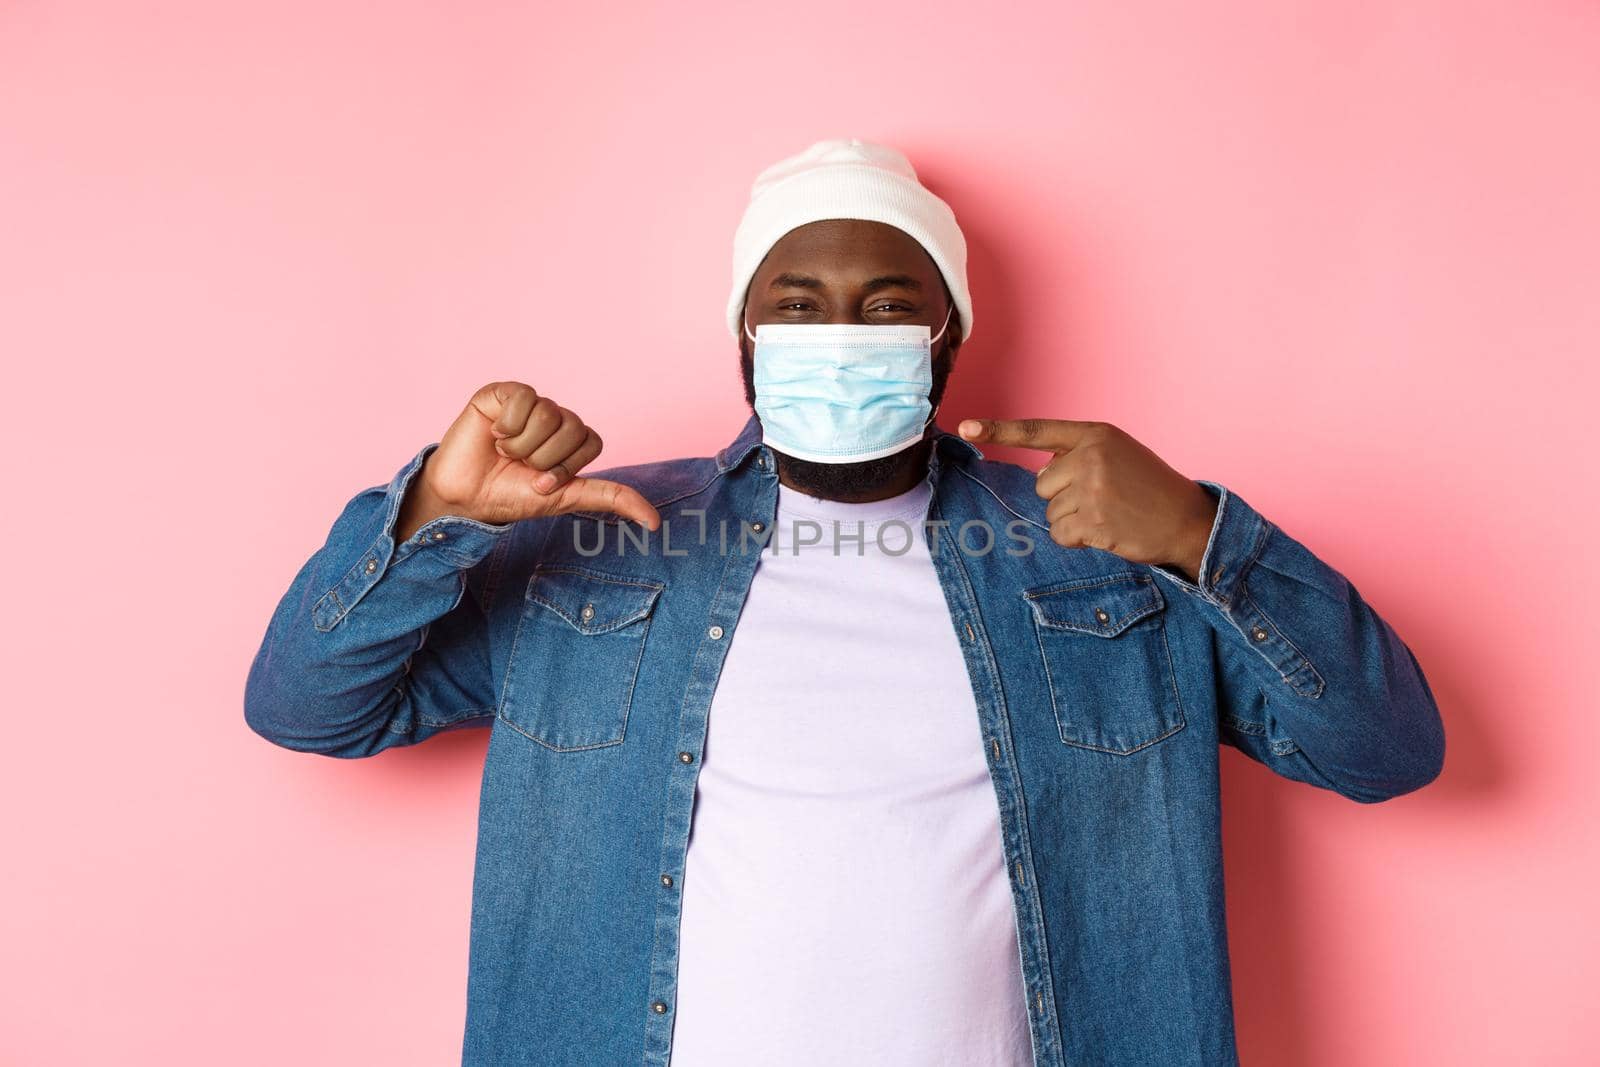 Coronavirus, lifestyle and global pandemic concept. Displeased hipster guy pointing at face mask, showing thumbs-down, dislike wearing it, pink background.